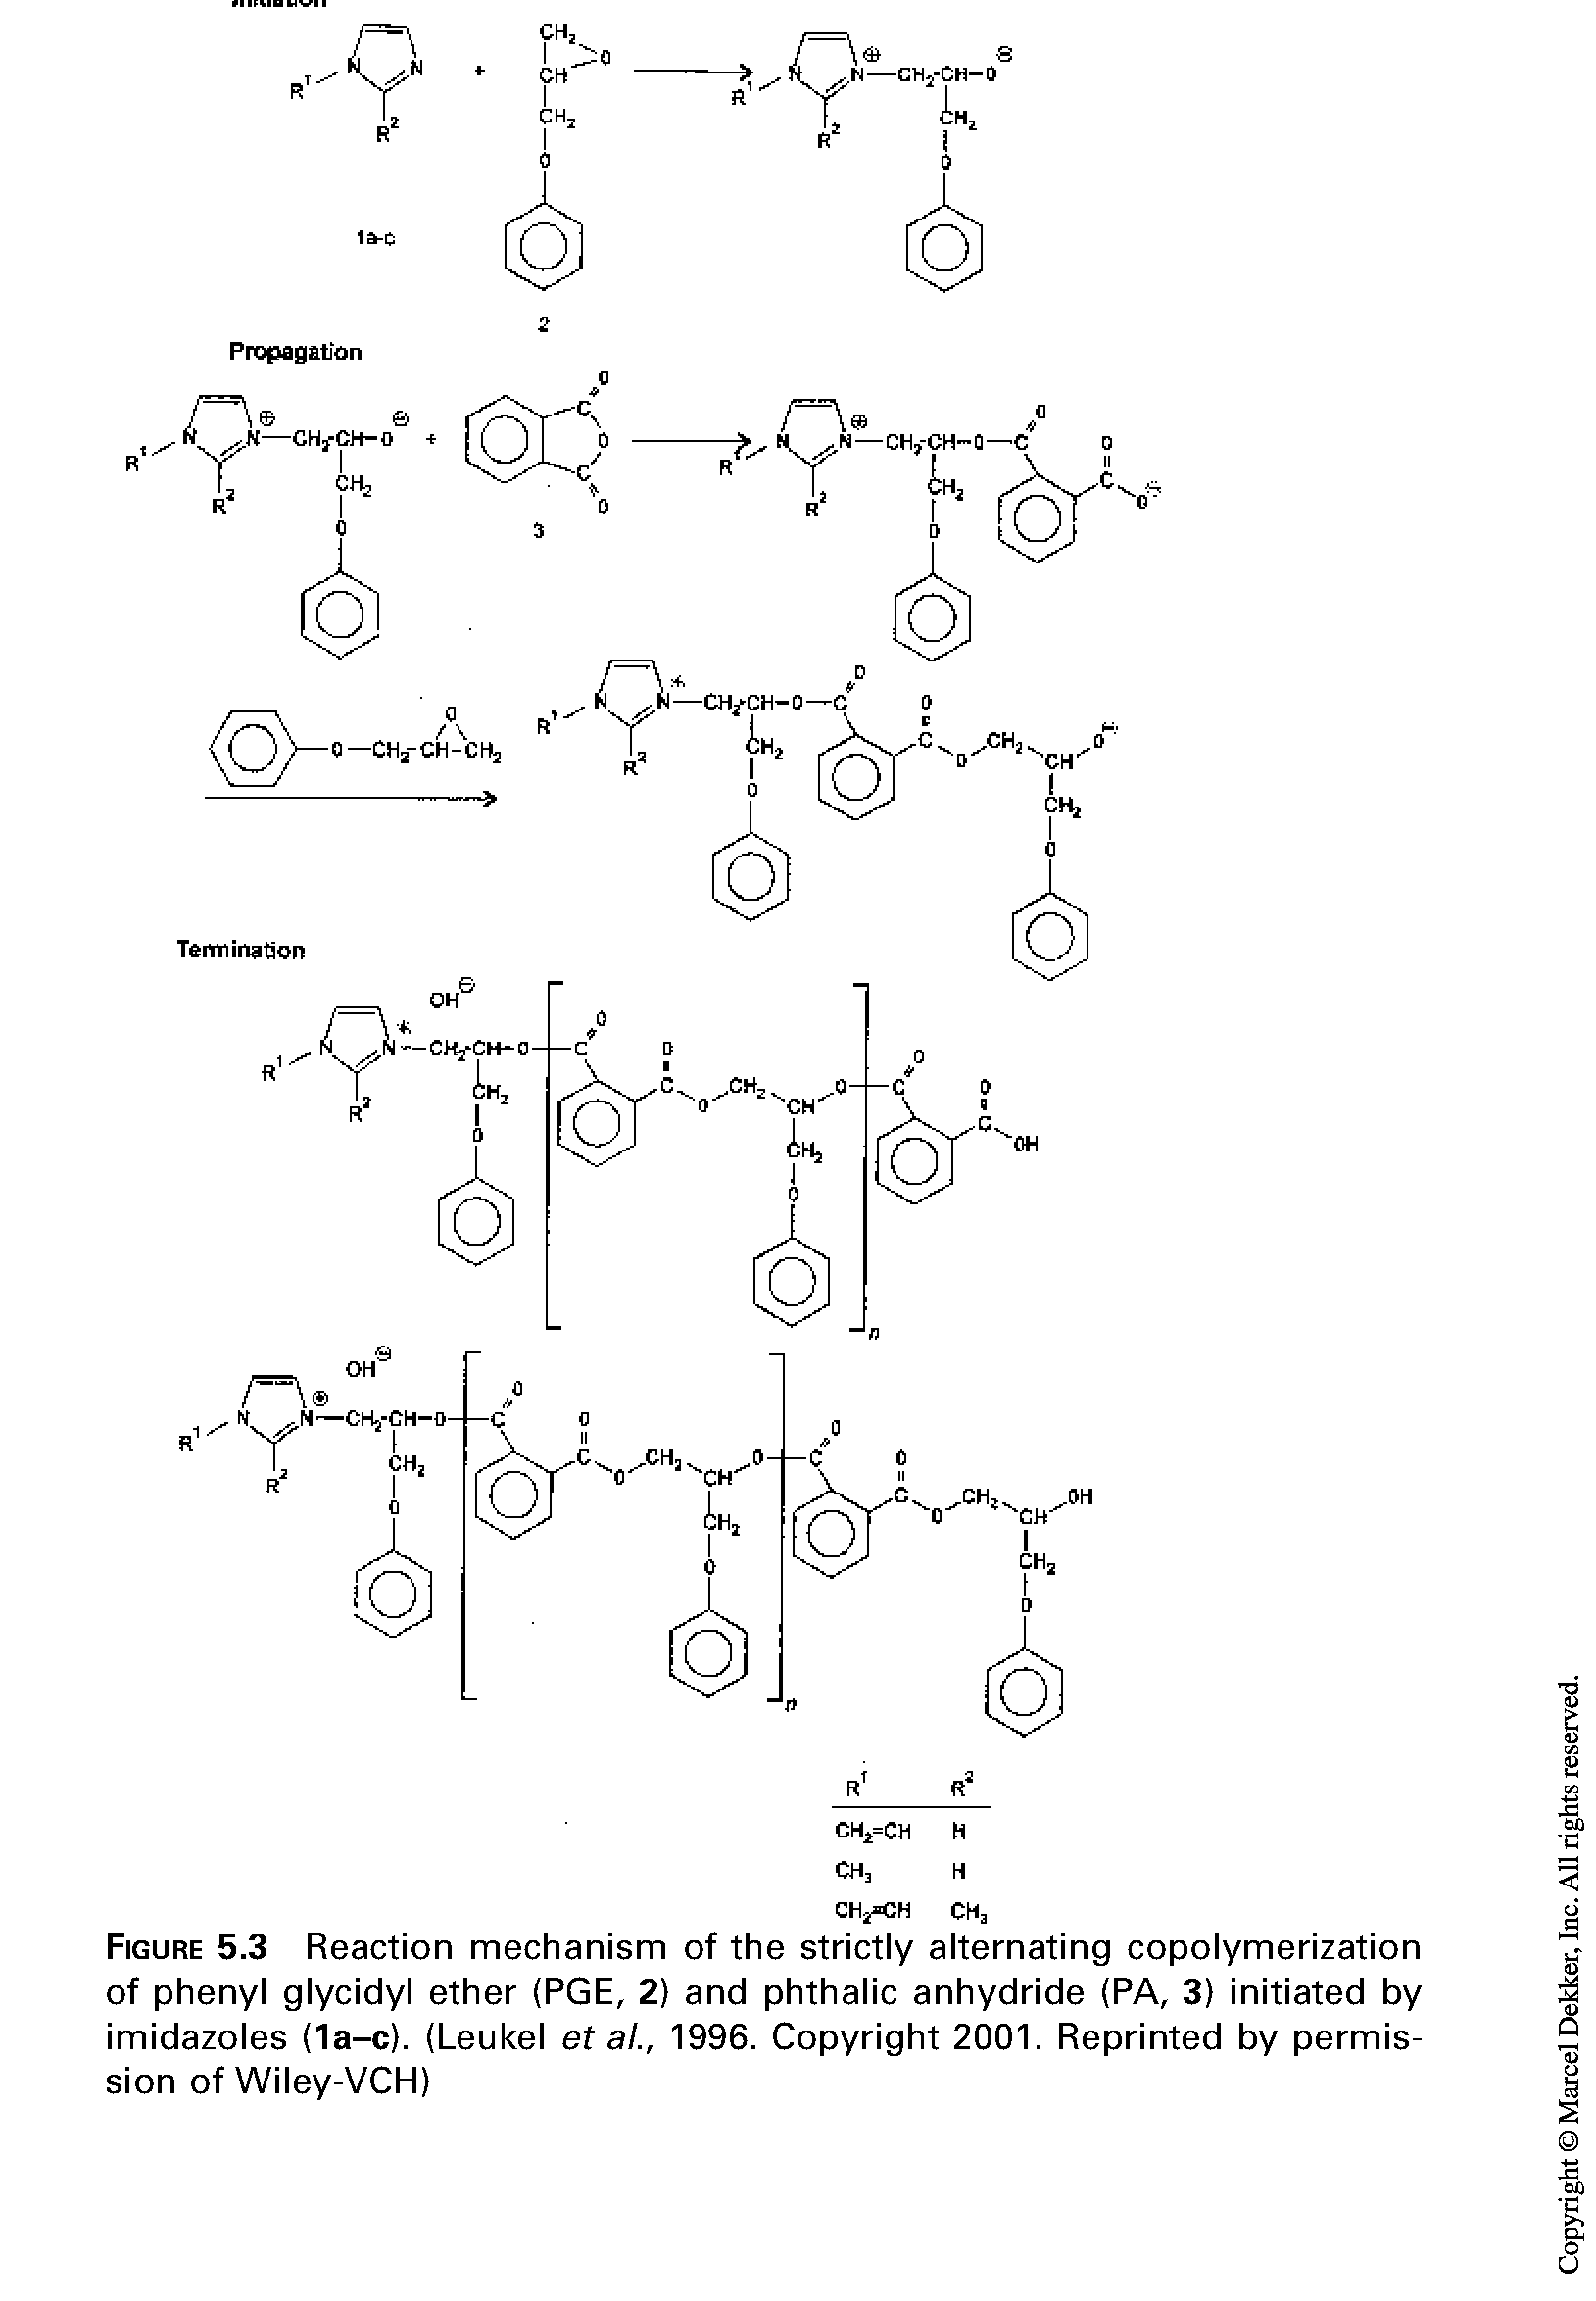 Figure 5.3 Reaction mechanism of the strictly alternating copolymerization of phenyl glycidyl ether (PGE, 2) and phthalic anhydride (PA, 3) initiated by imidazoles (la-c). (Leukel et al., 1996. Copyright 2001. Reprinted by permission ofWiley-VCH)...